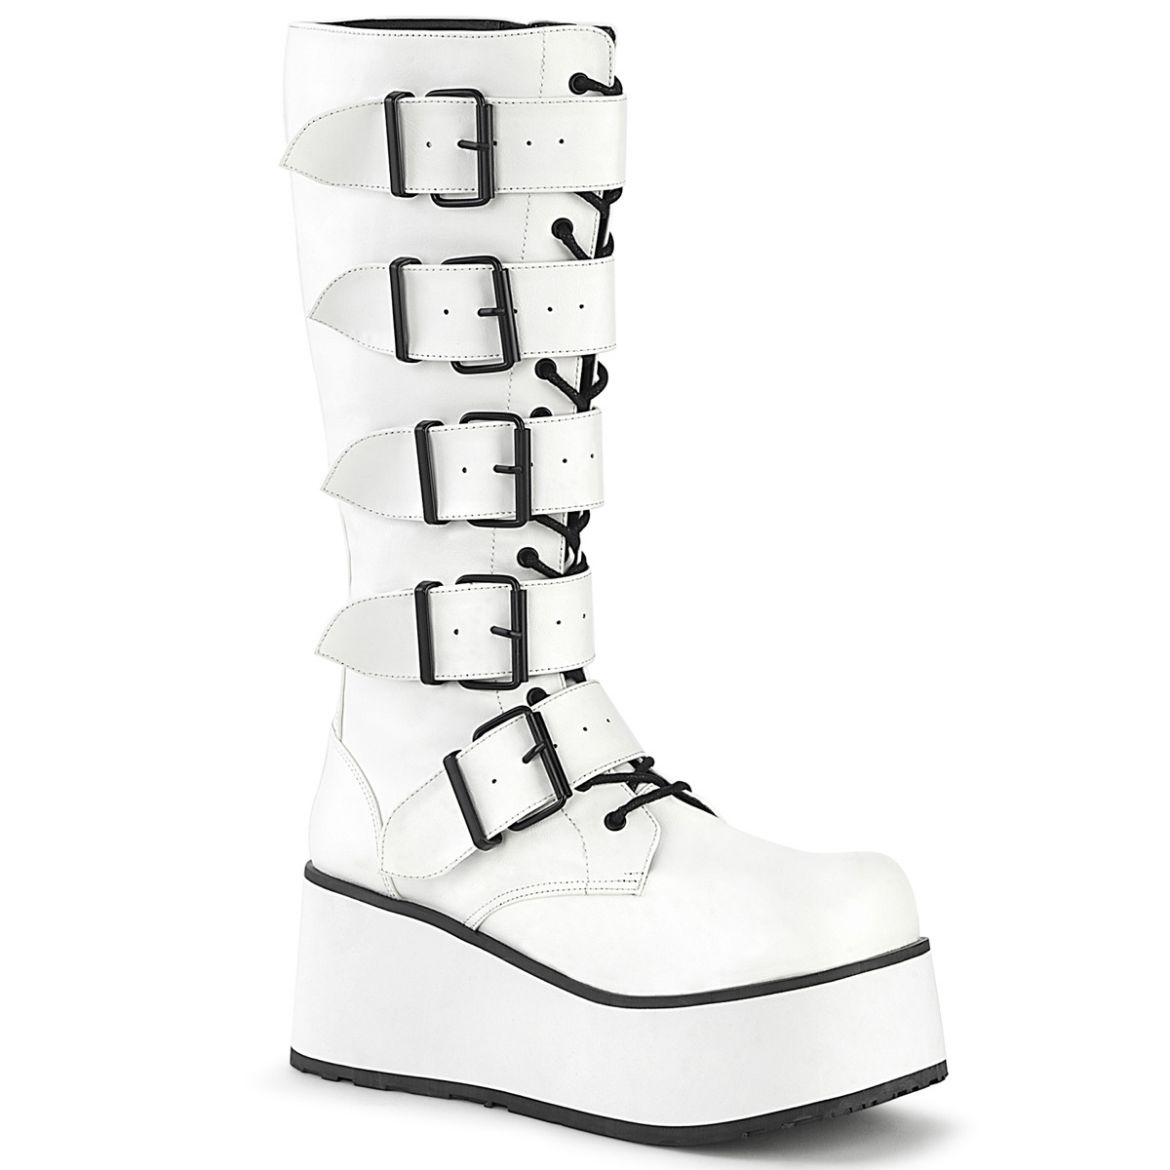 Product image of Demonia TRASHVILLE-518 White Vegan Faux Leather 3 1/4 inch Platform Lace-Up Knee High Boots Side Zip